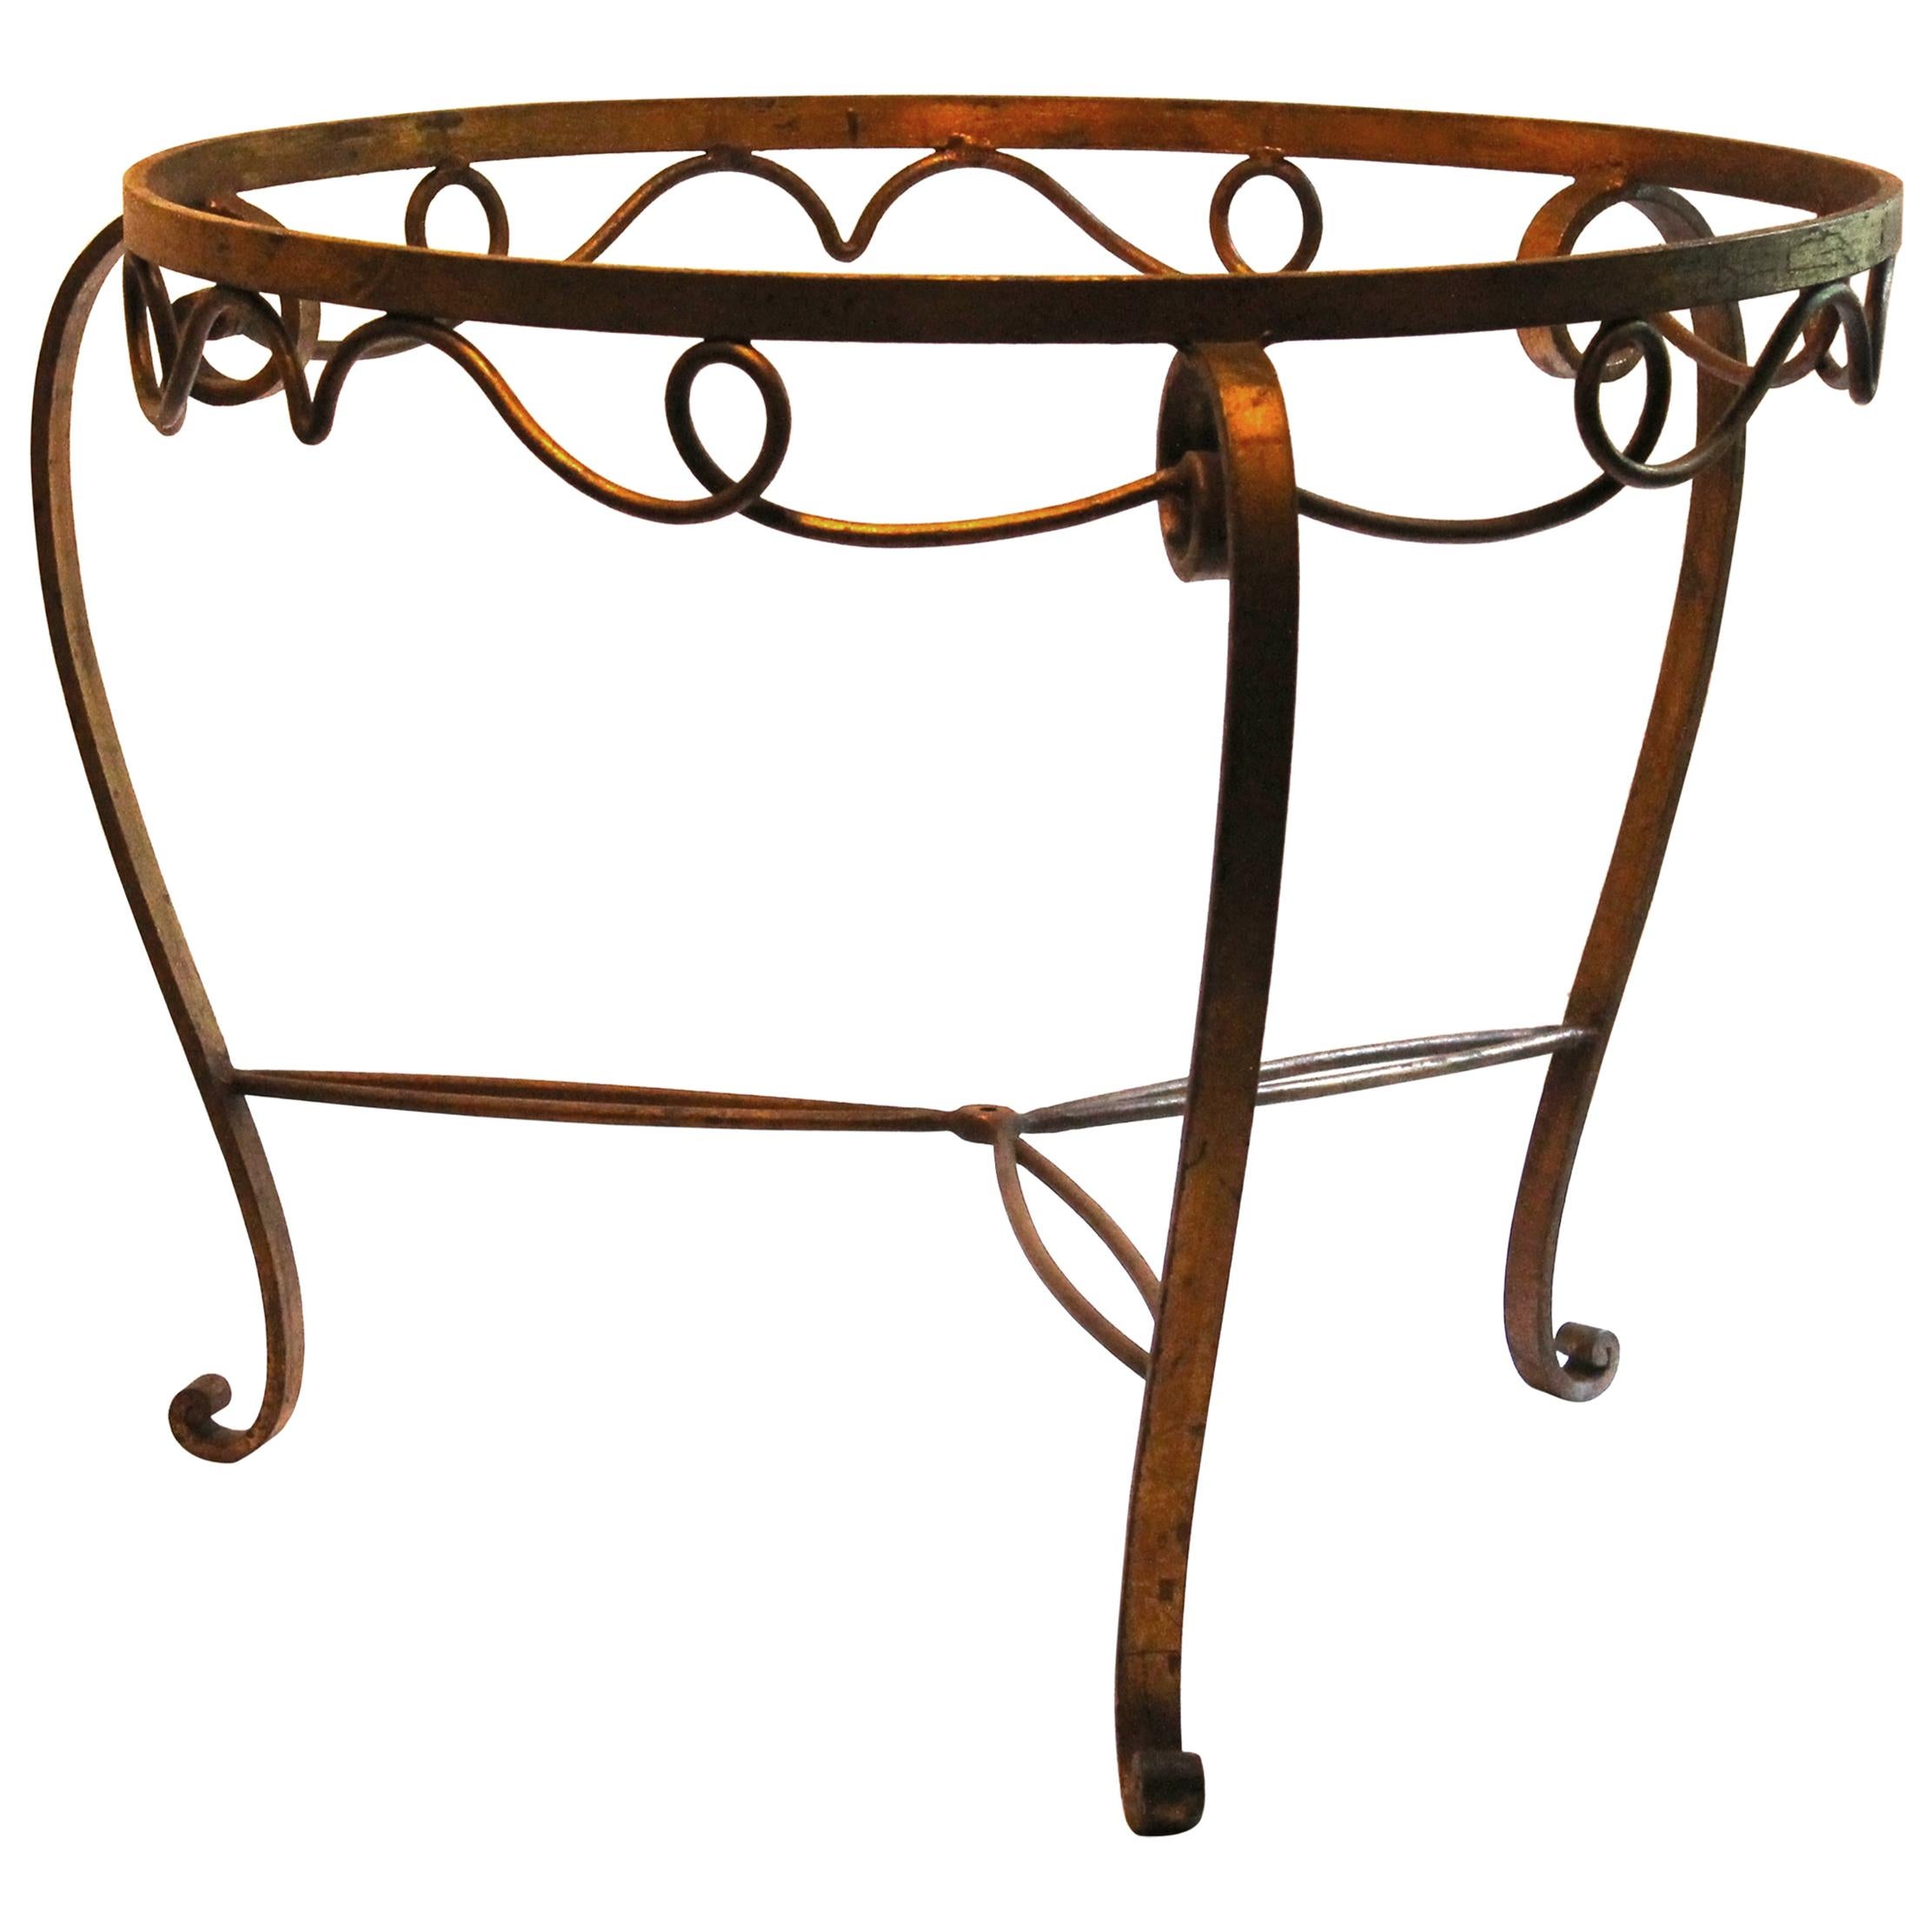 Rene Drouet Style Gilded Wrought Iron Coffee Table